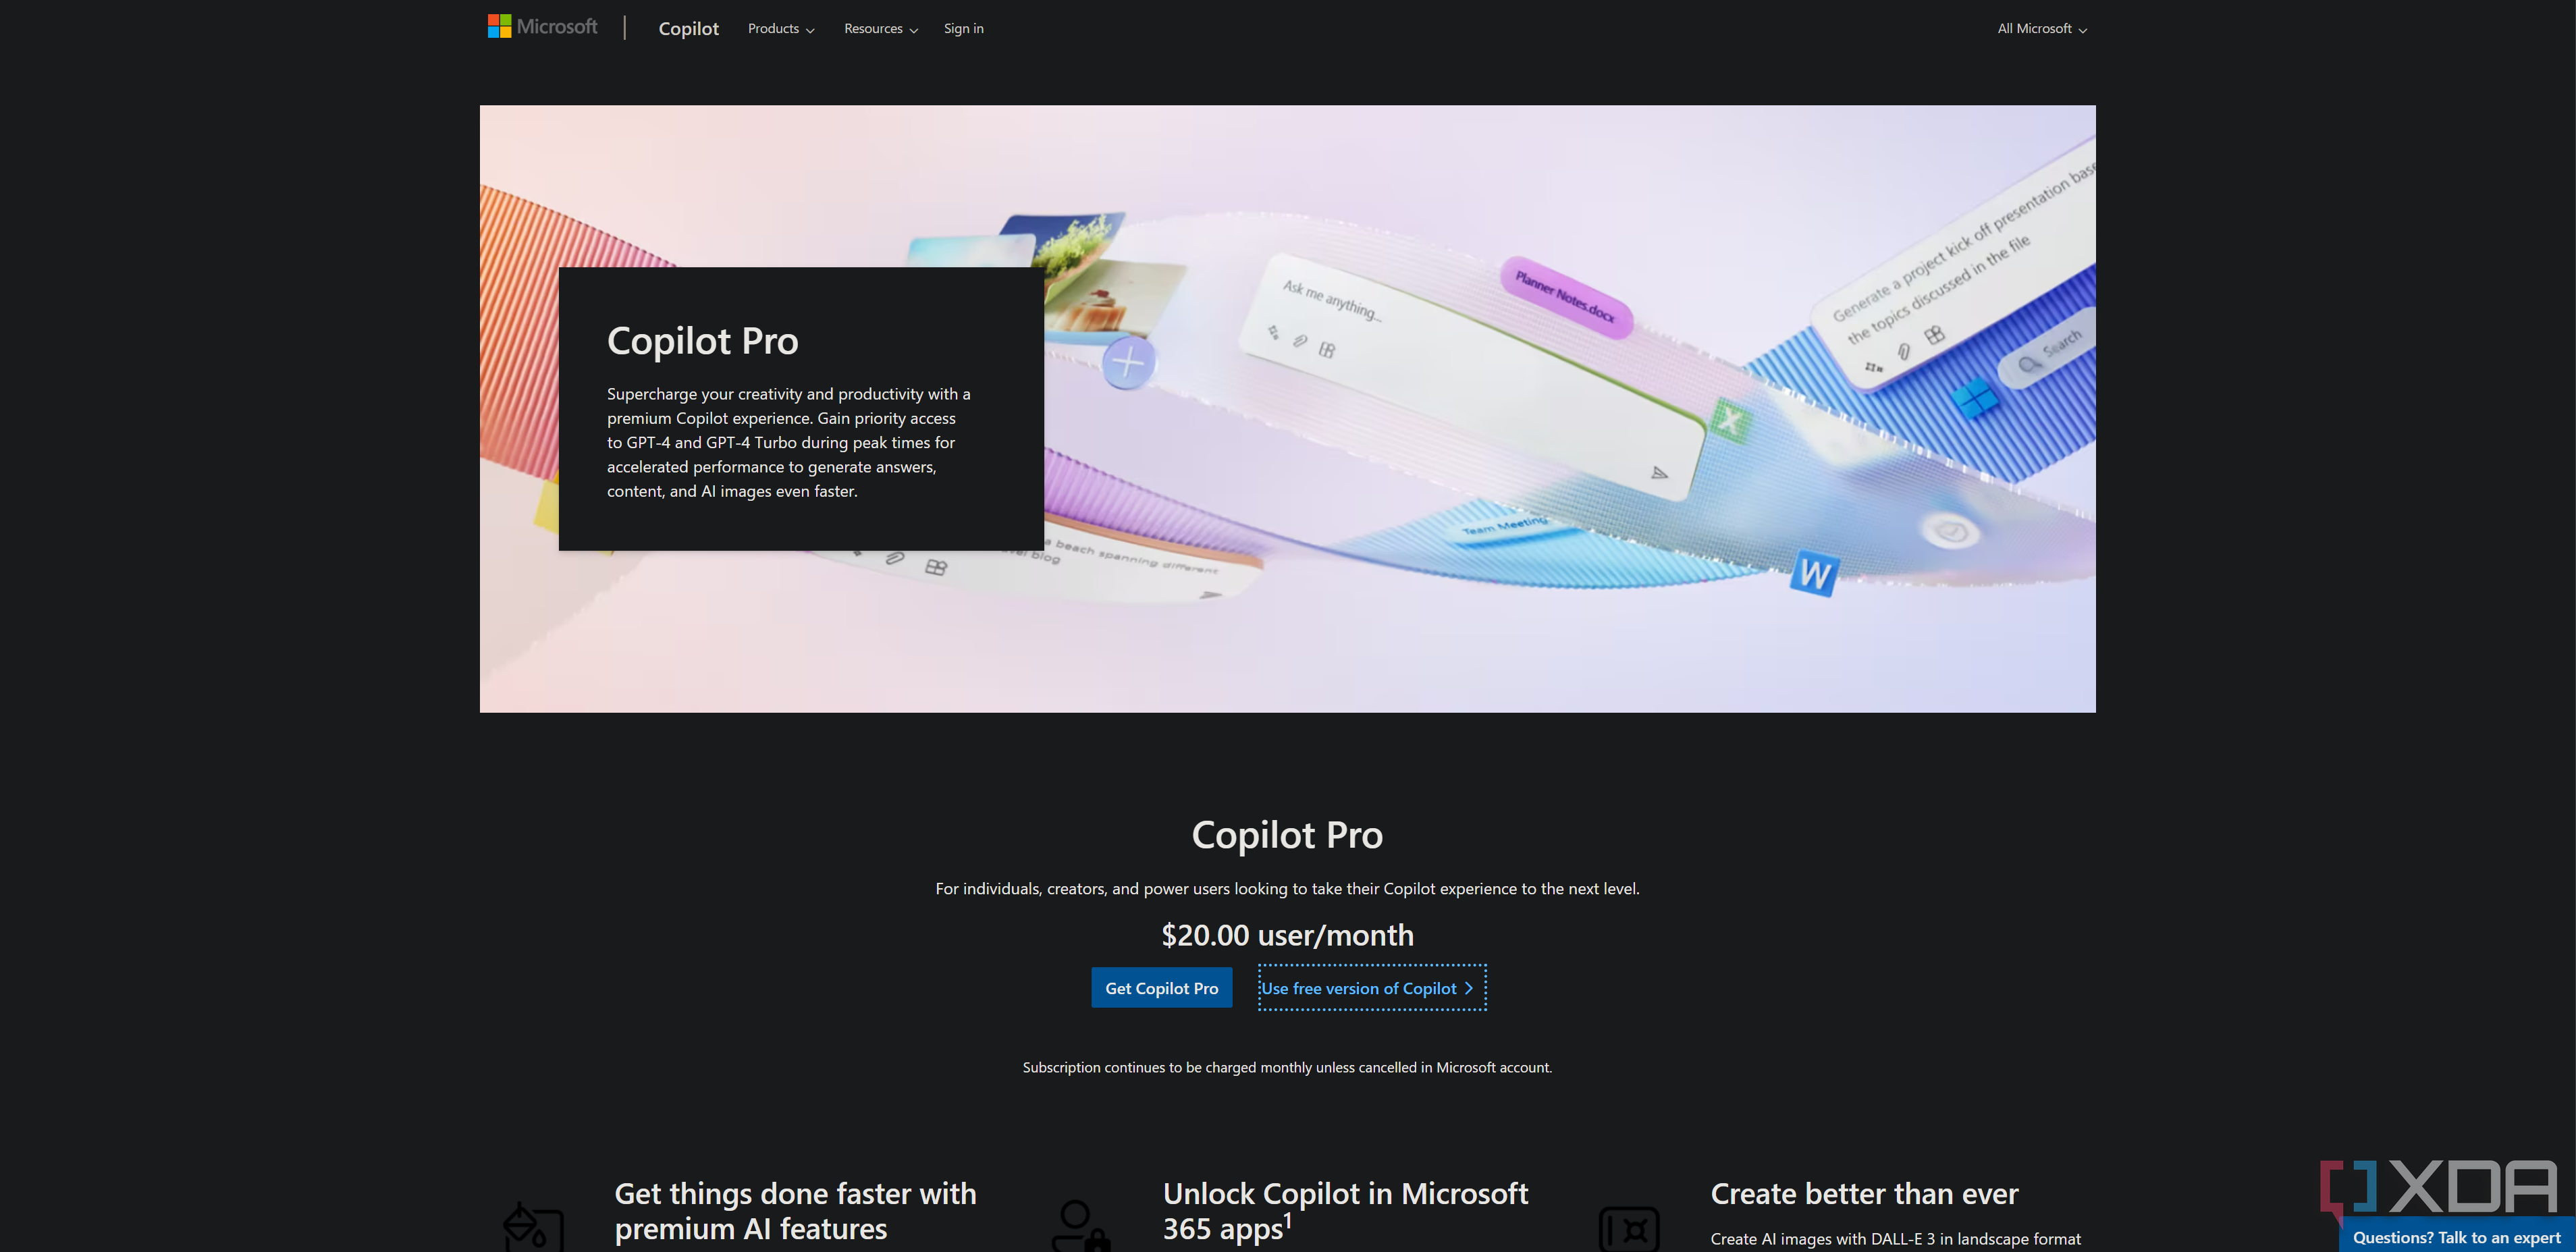 Copilot Pro landing page, advertising the benefits of it